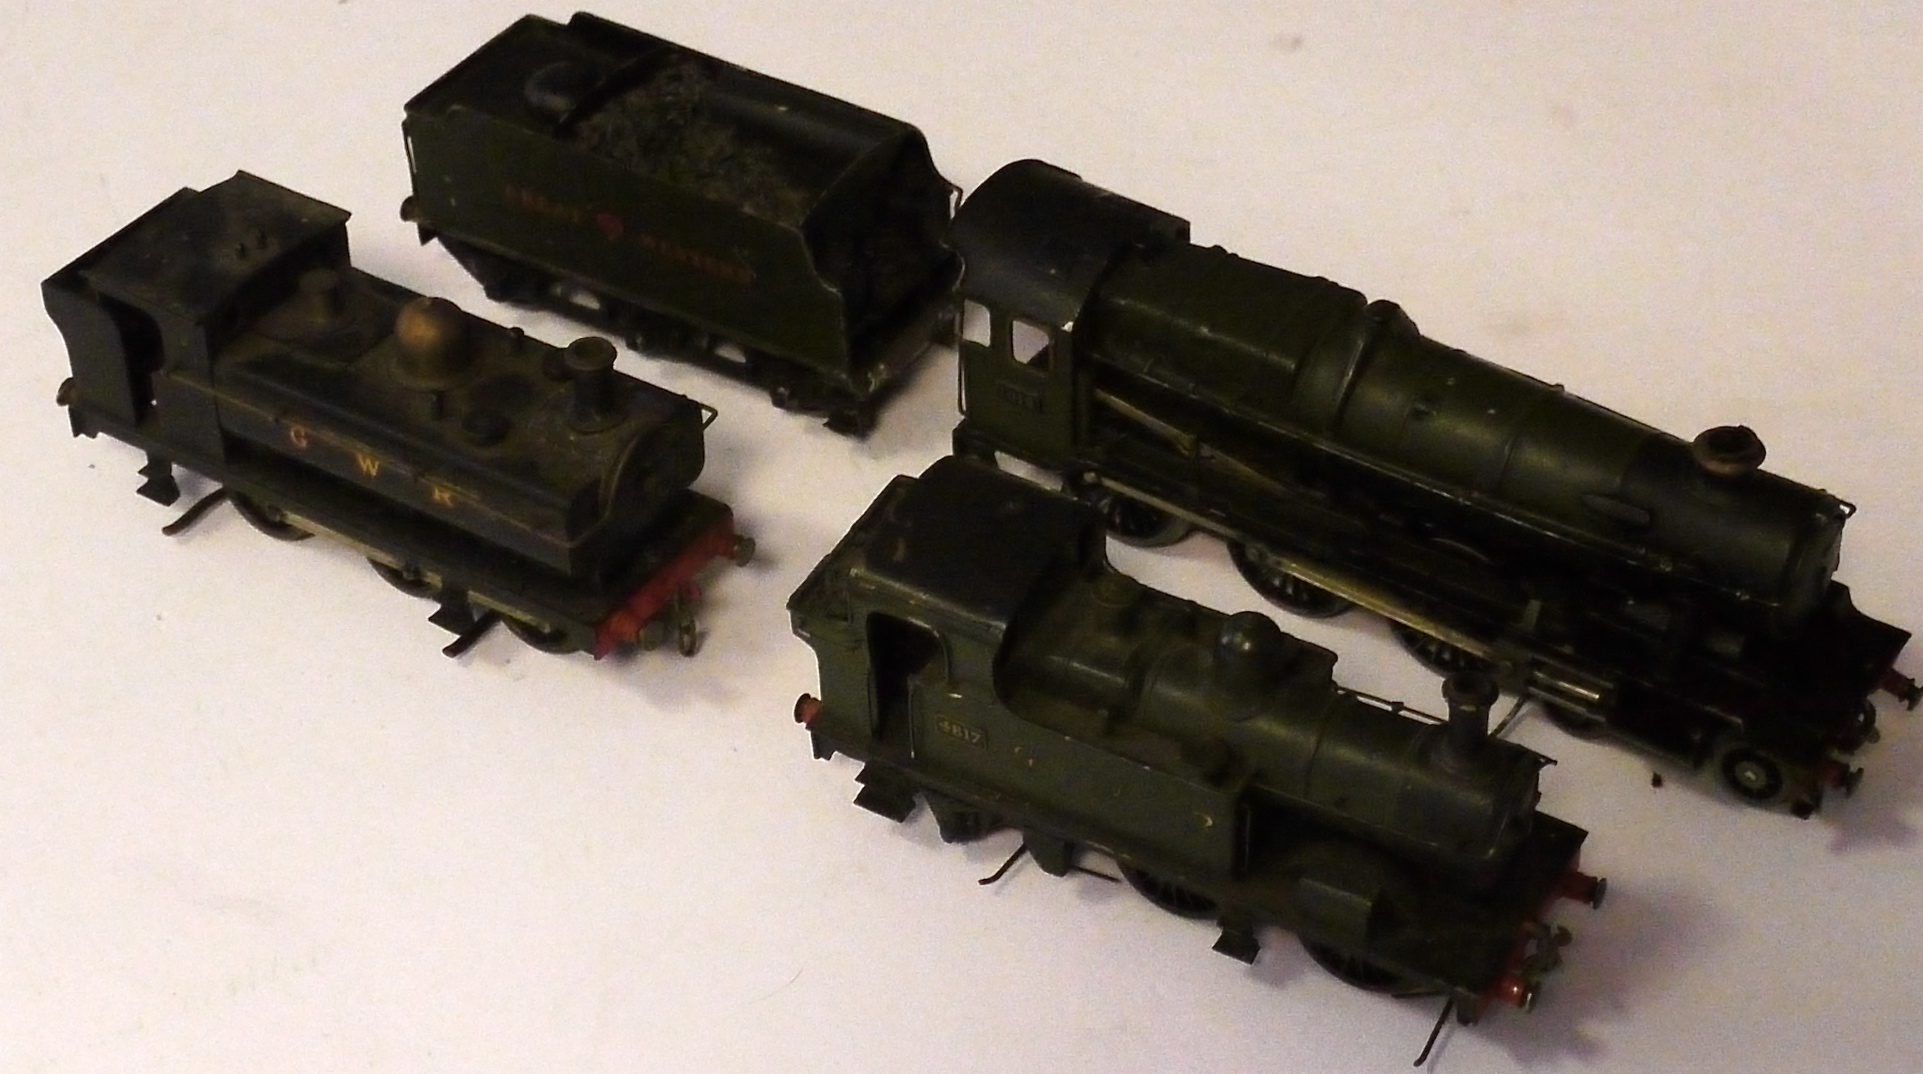 Three Historic OO Gauge GWR Locomotive Models for 'Outside-Third' Rail Operation, possibly by Bond's